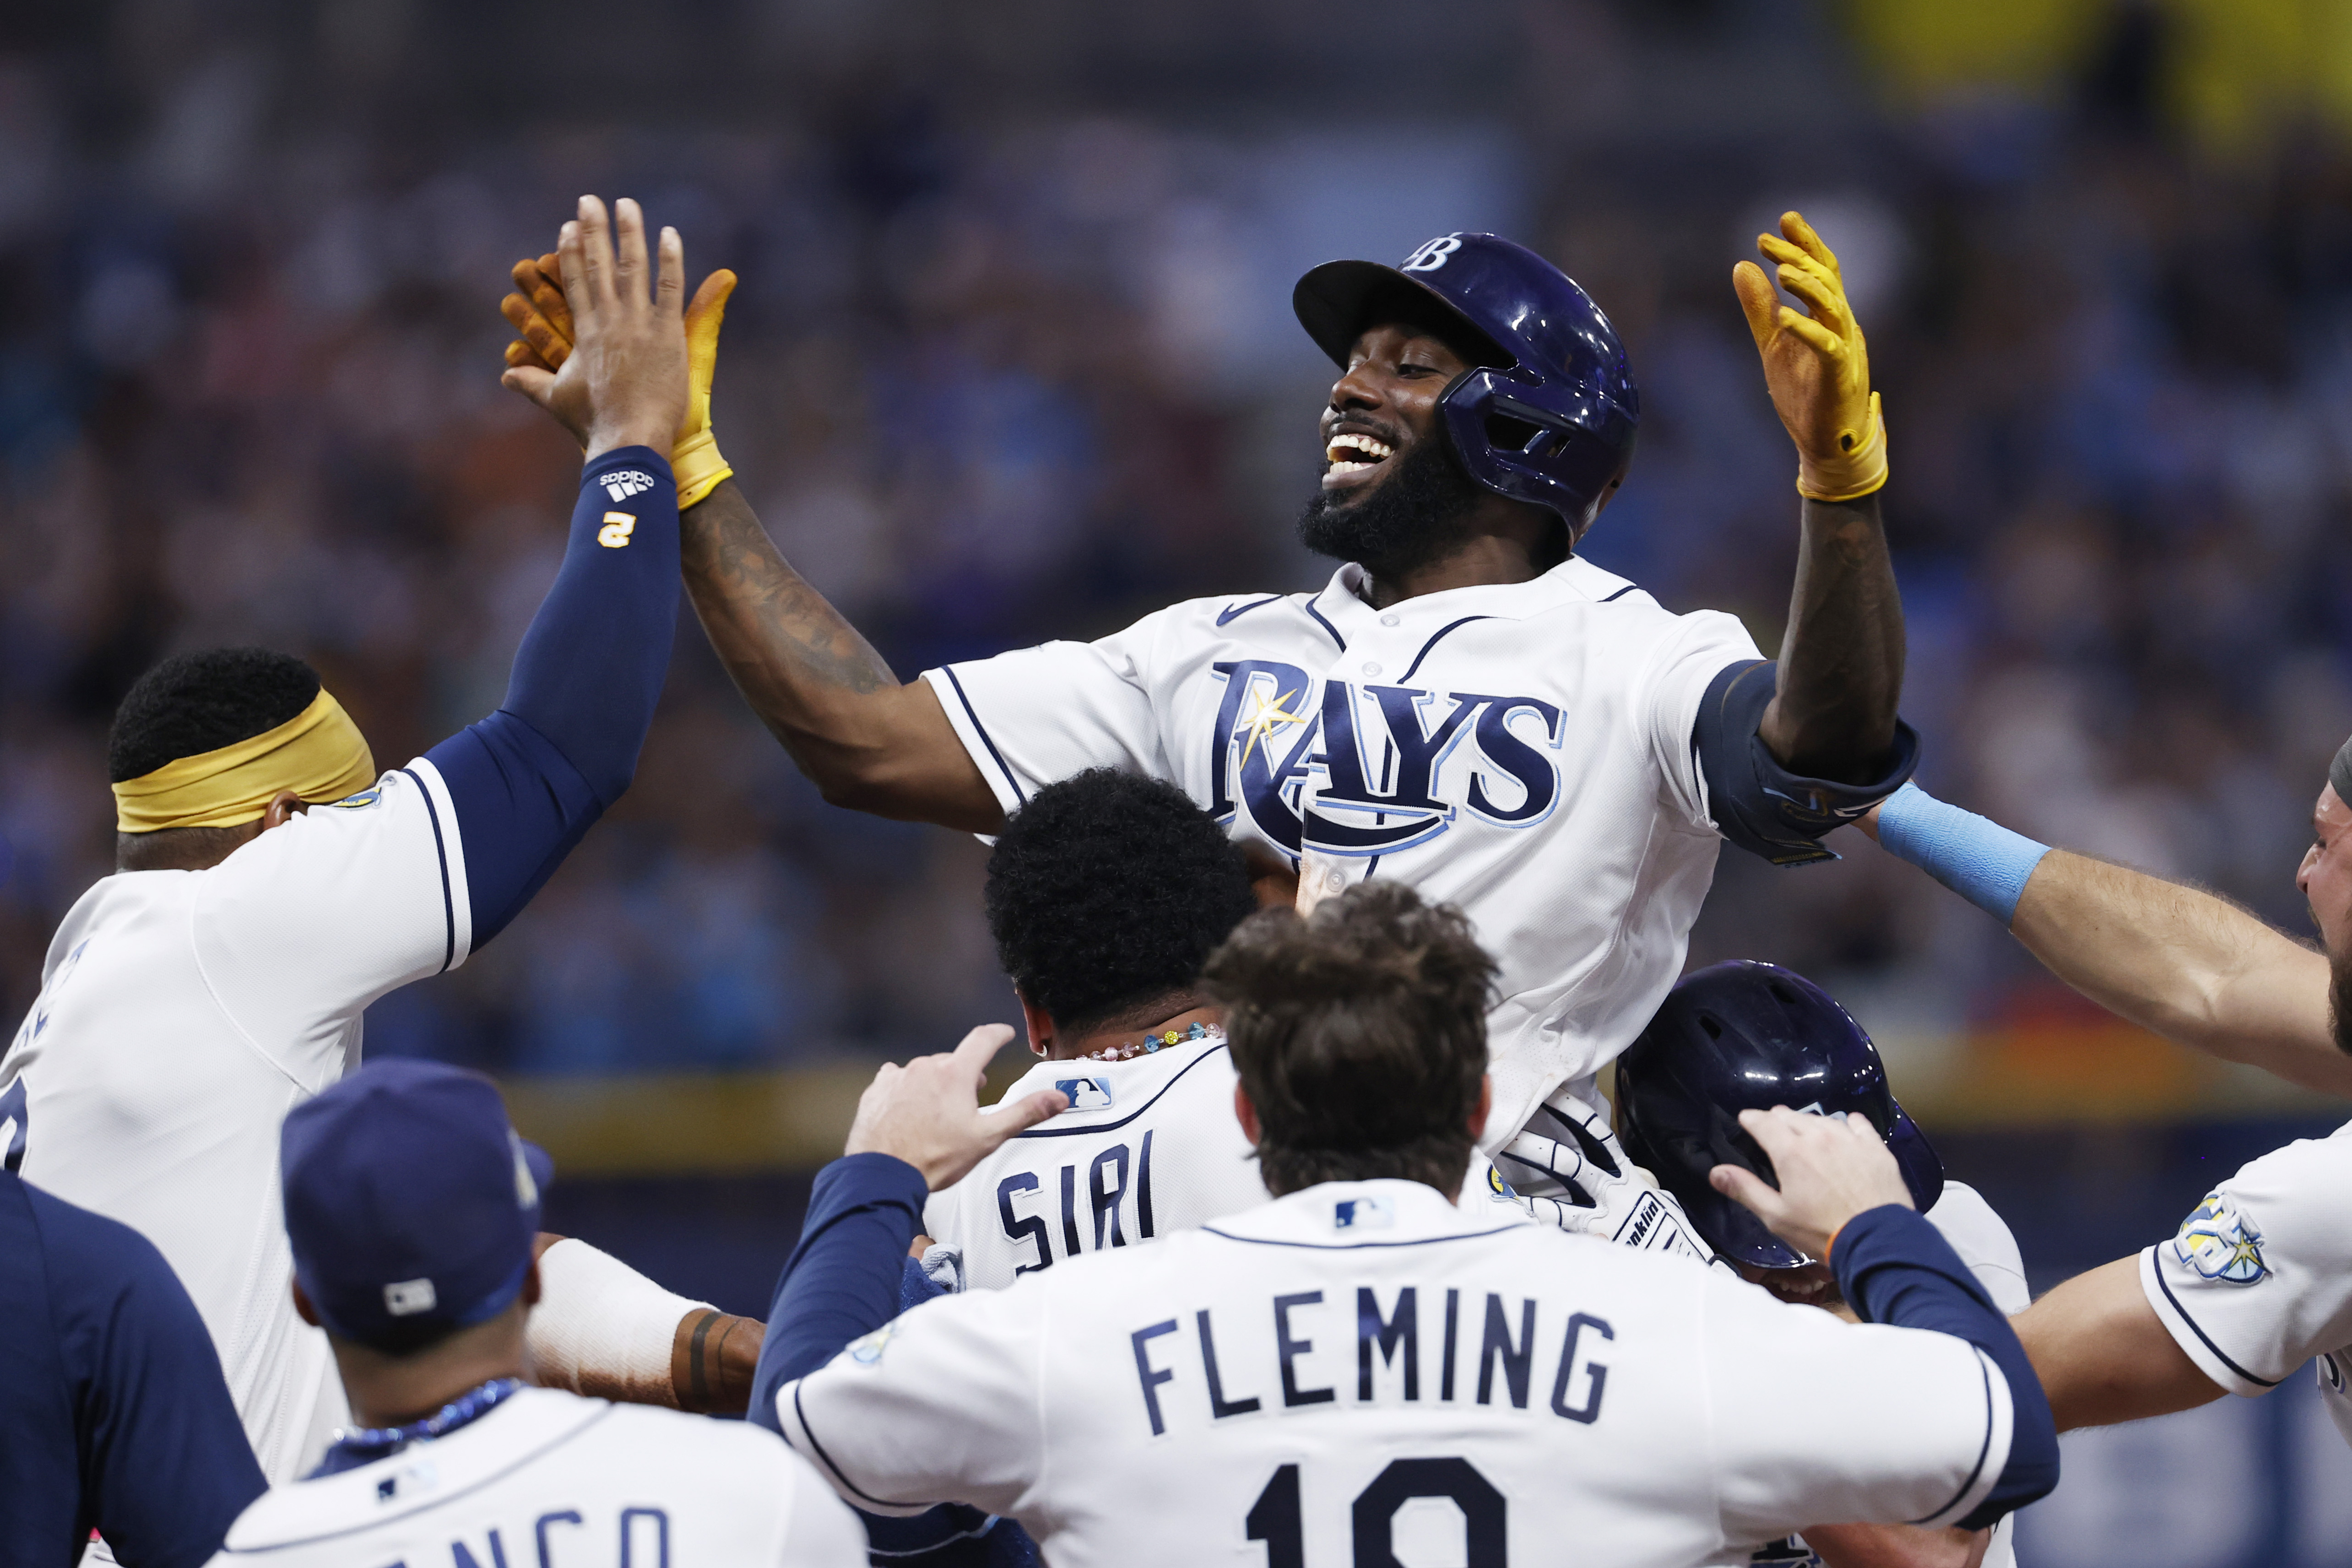 Tampa Bay Rays - Your 2023 Tampa Bay Rays!